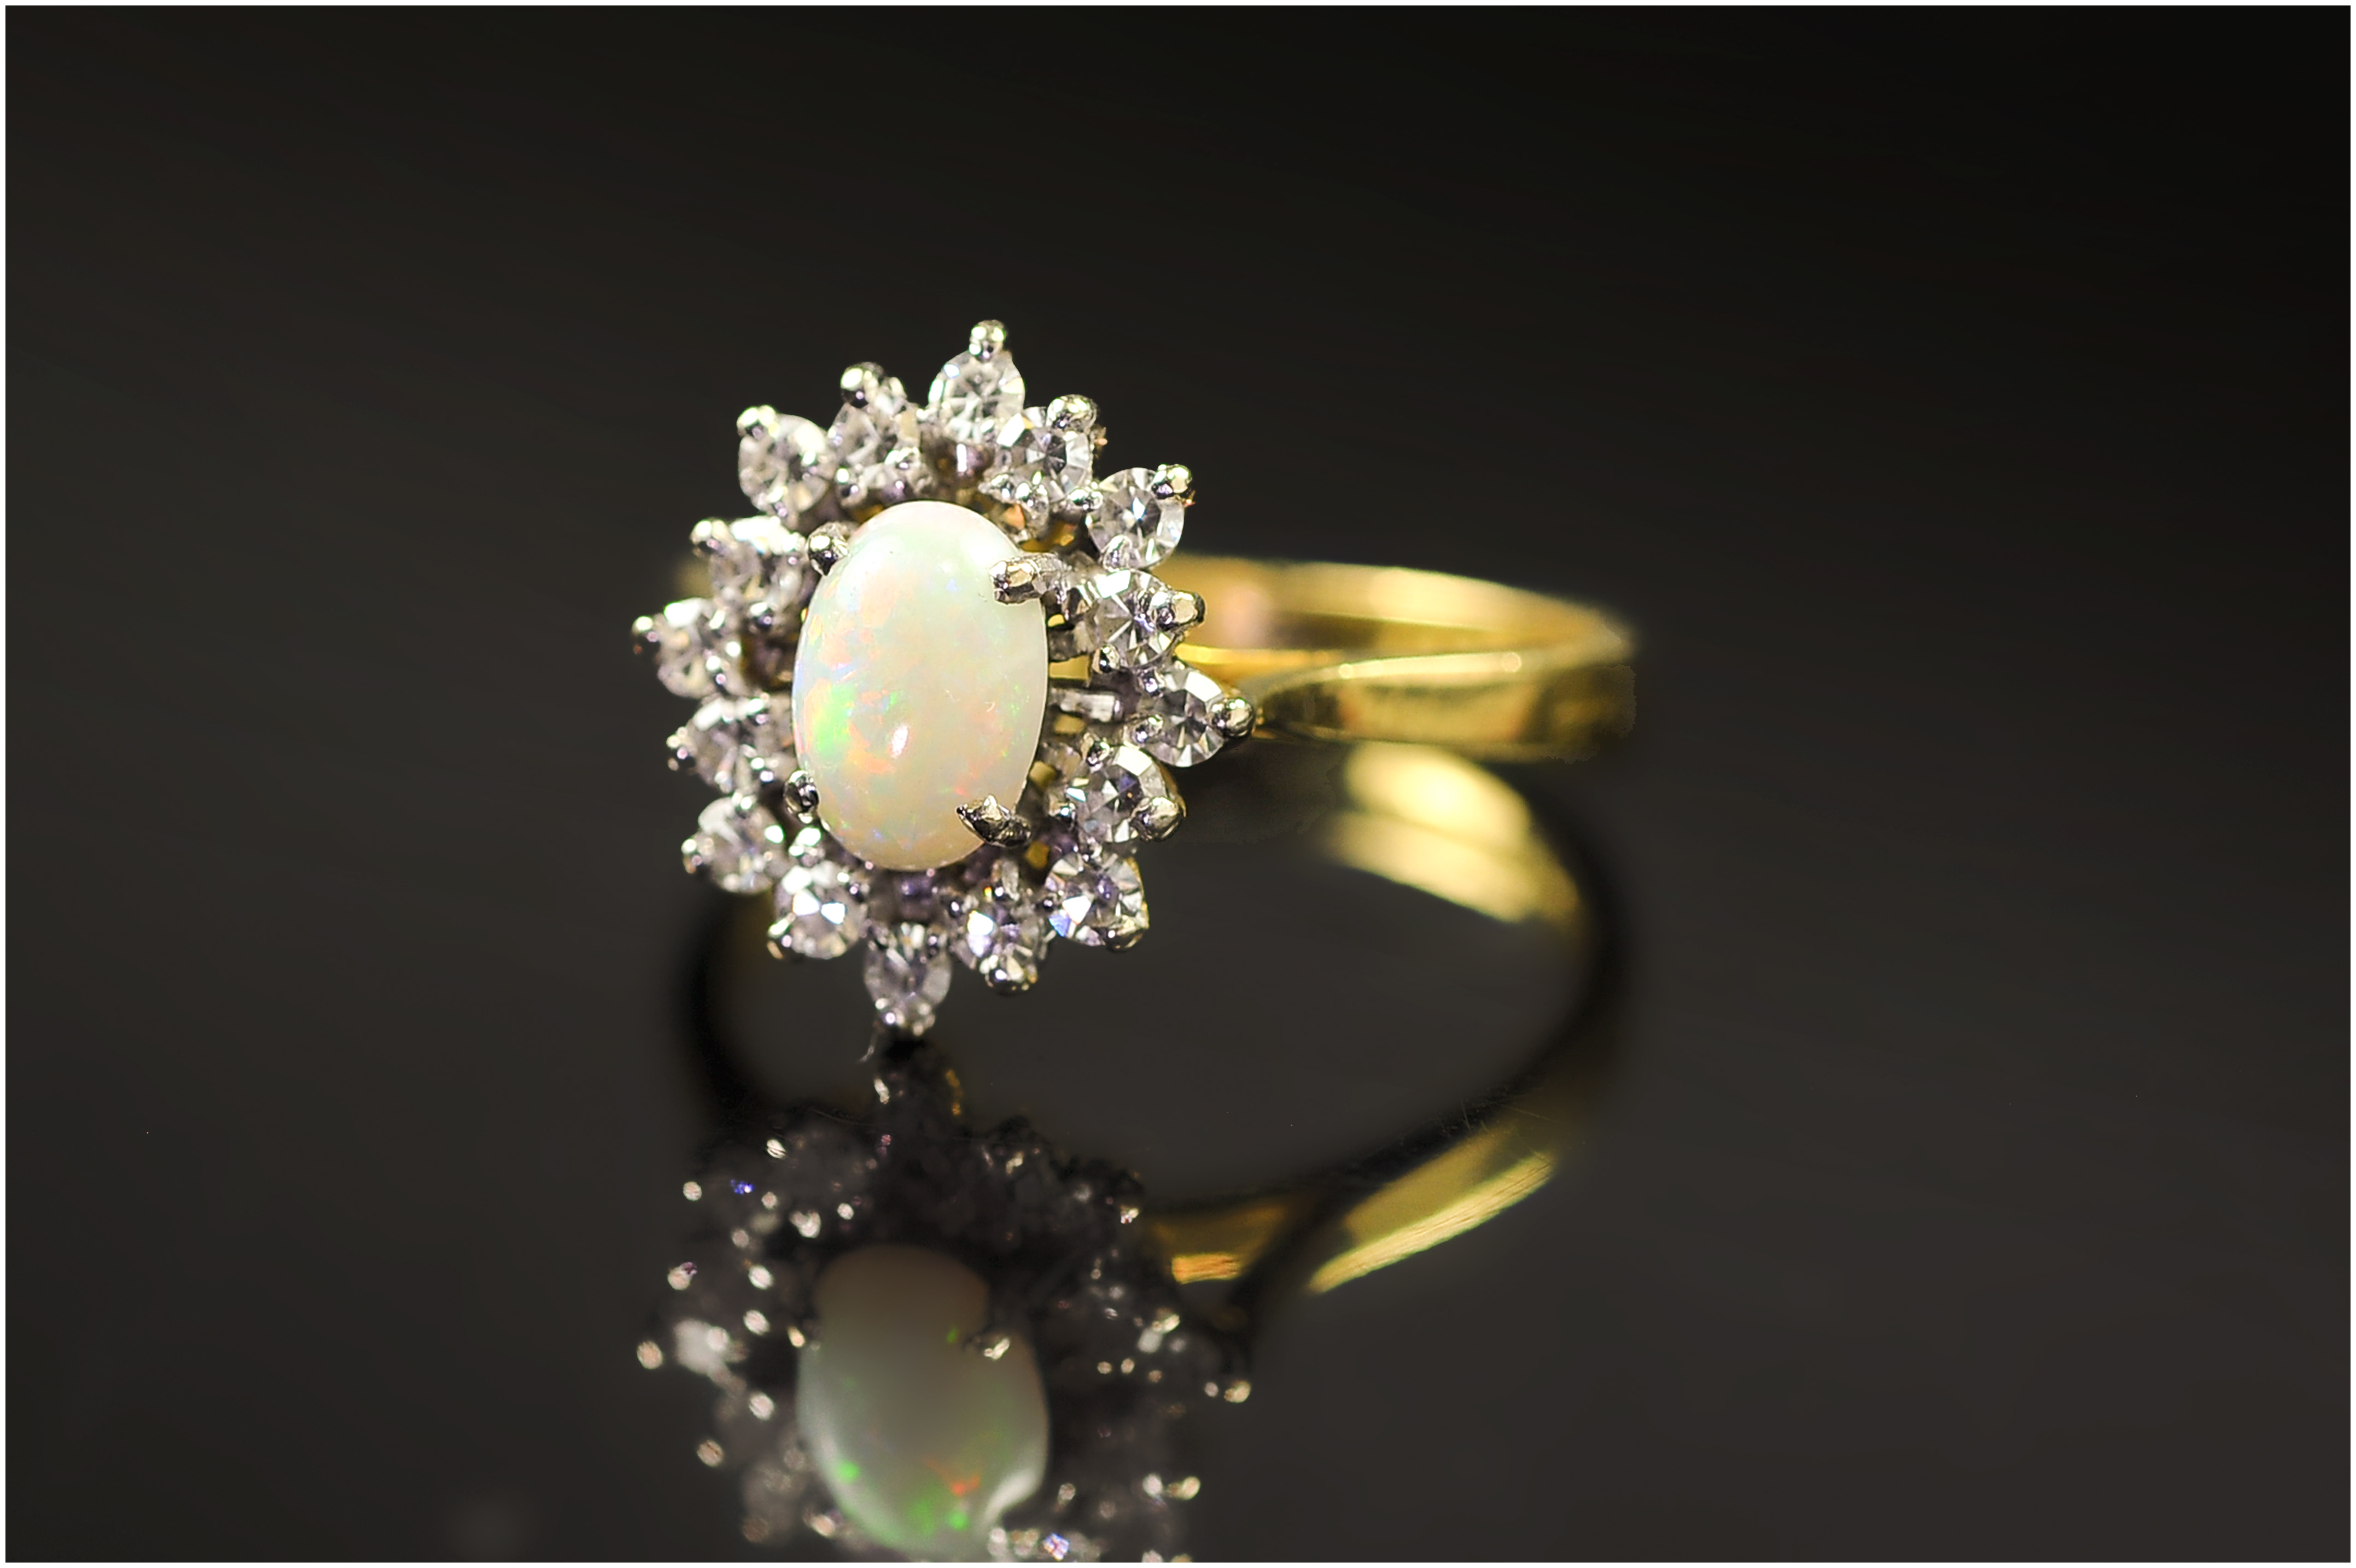 18ct Gold Diamond Dress Ring, Set With A Central Opal Surrounded By Round Cut Diamonds, Fully - Image 3 of 5